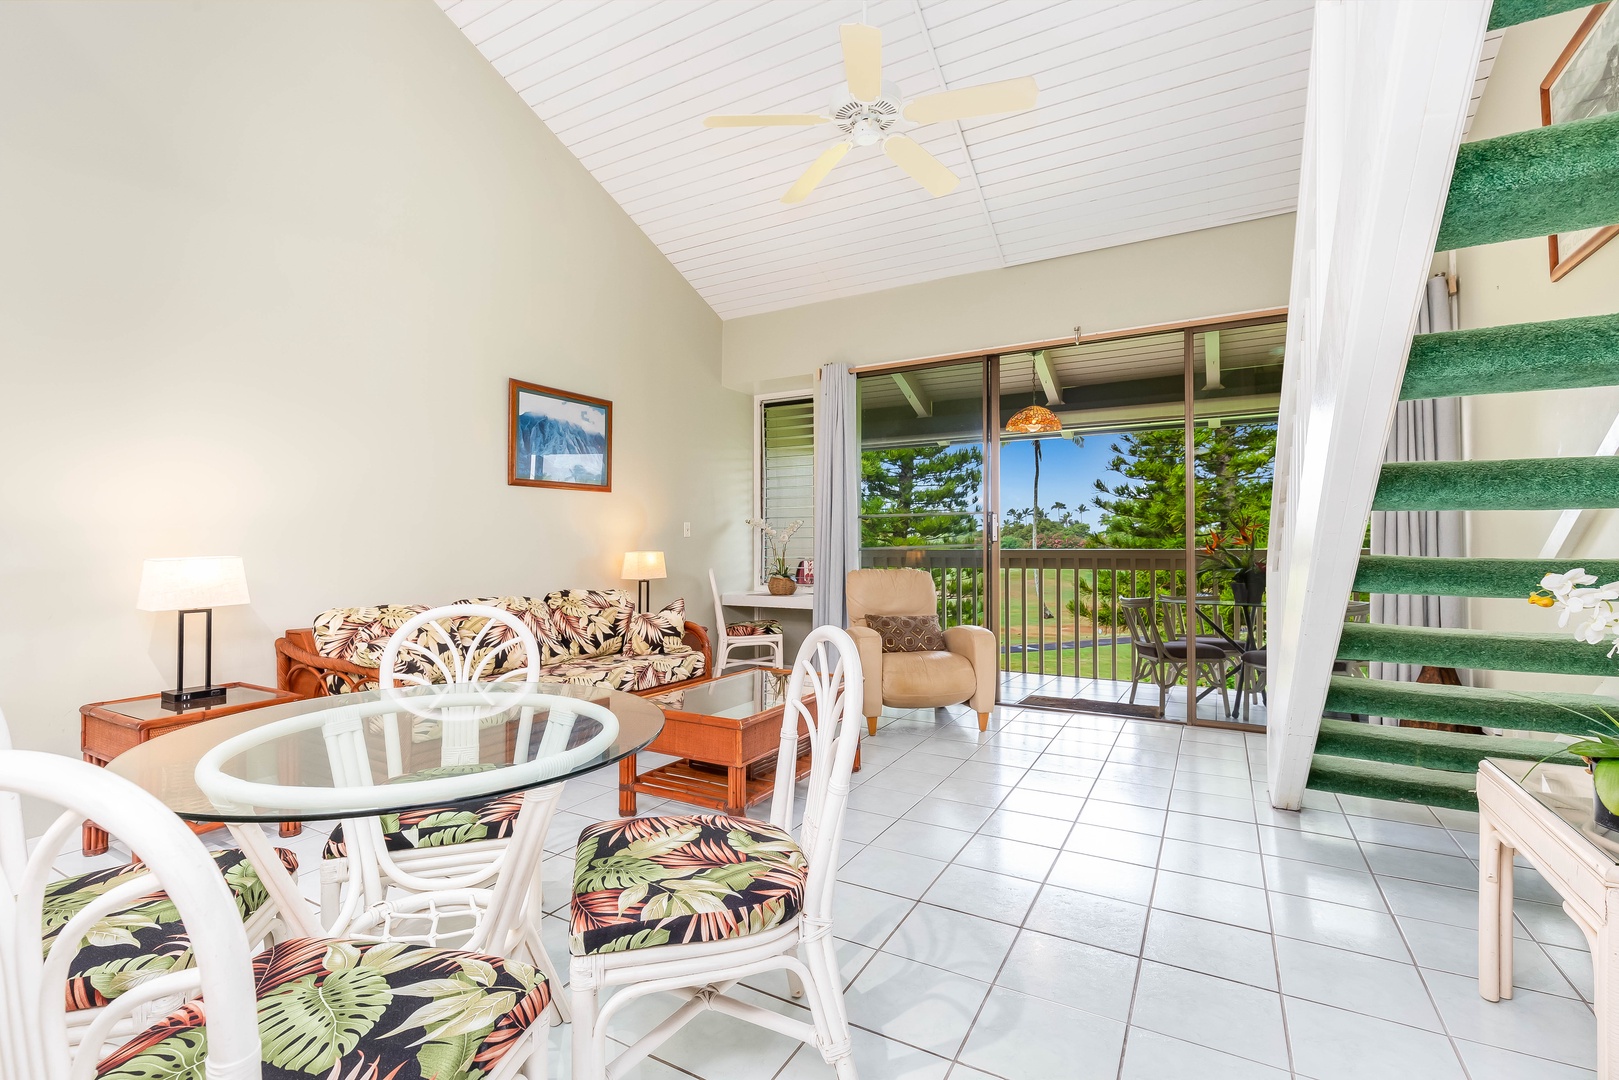 Kahuku Vacation Rentals, Ilima West Kuilima Estates #18 at Turtle Bay - Experience an open floor plan that seamlessly extends to the outdoor deck, merging the indoor elegance with the charm of the great outdoors.